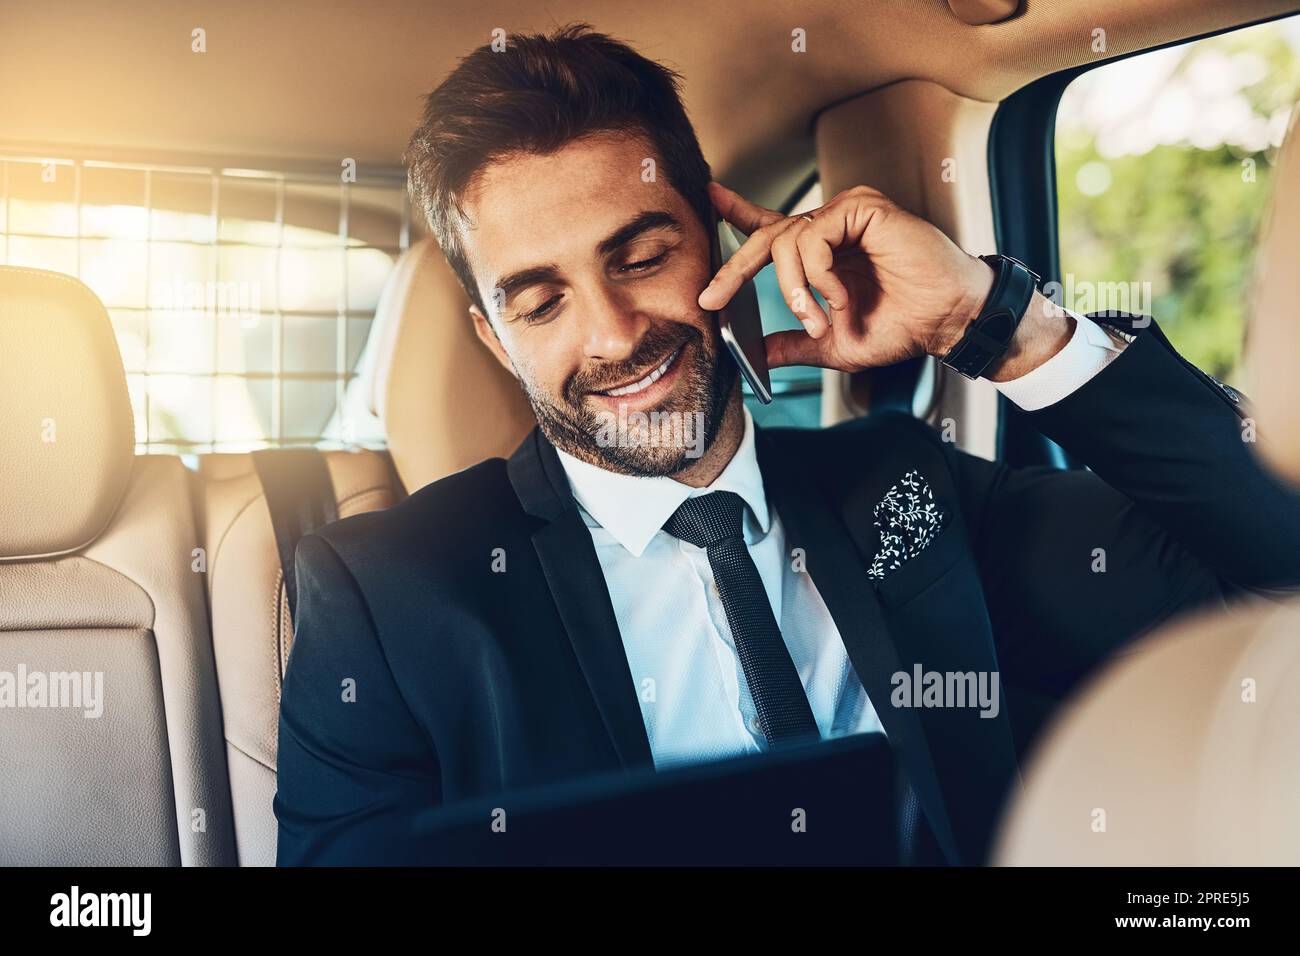 Hes hearing good news on hes way to the office. a handsome young corporate businessman on a call while commuting. Stock Photo